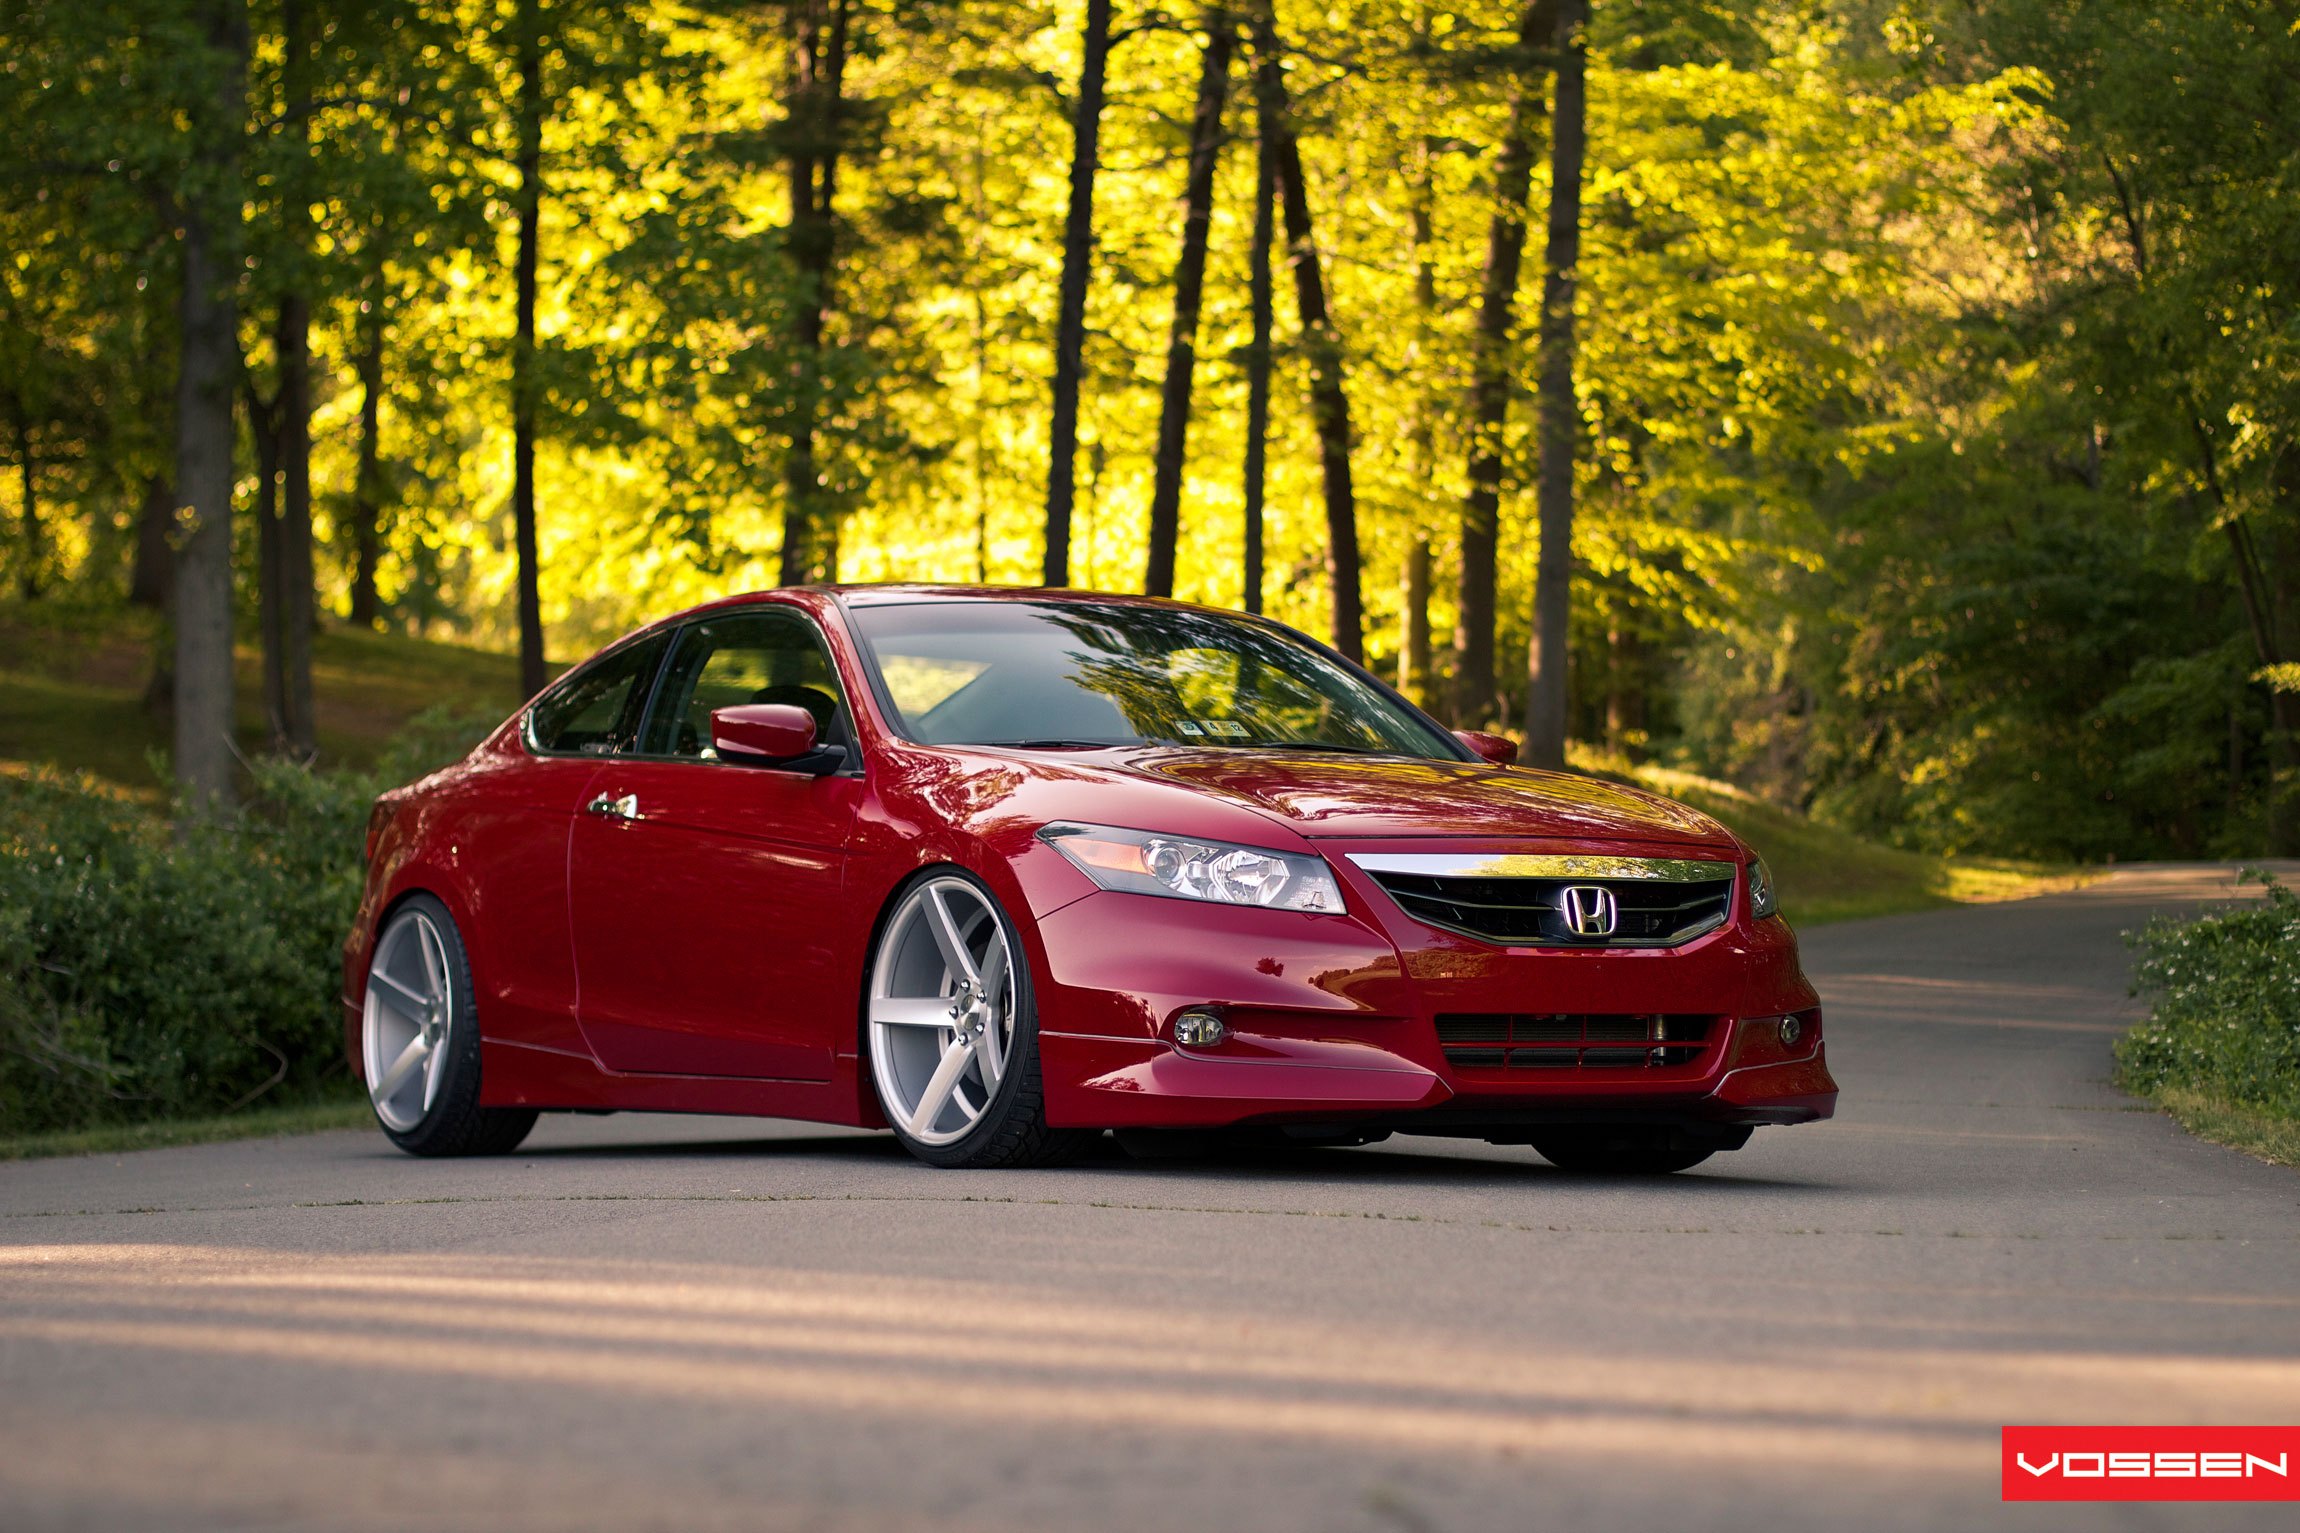 Sporty- Looking Red Honda Accord with Chrome Trim — CARiD.com Gallery